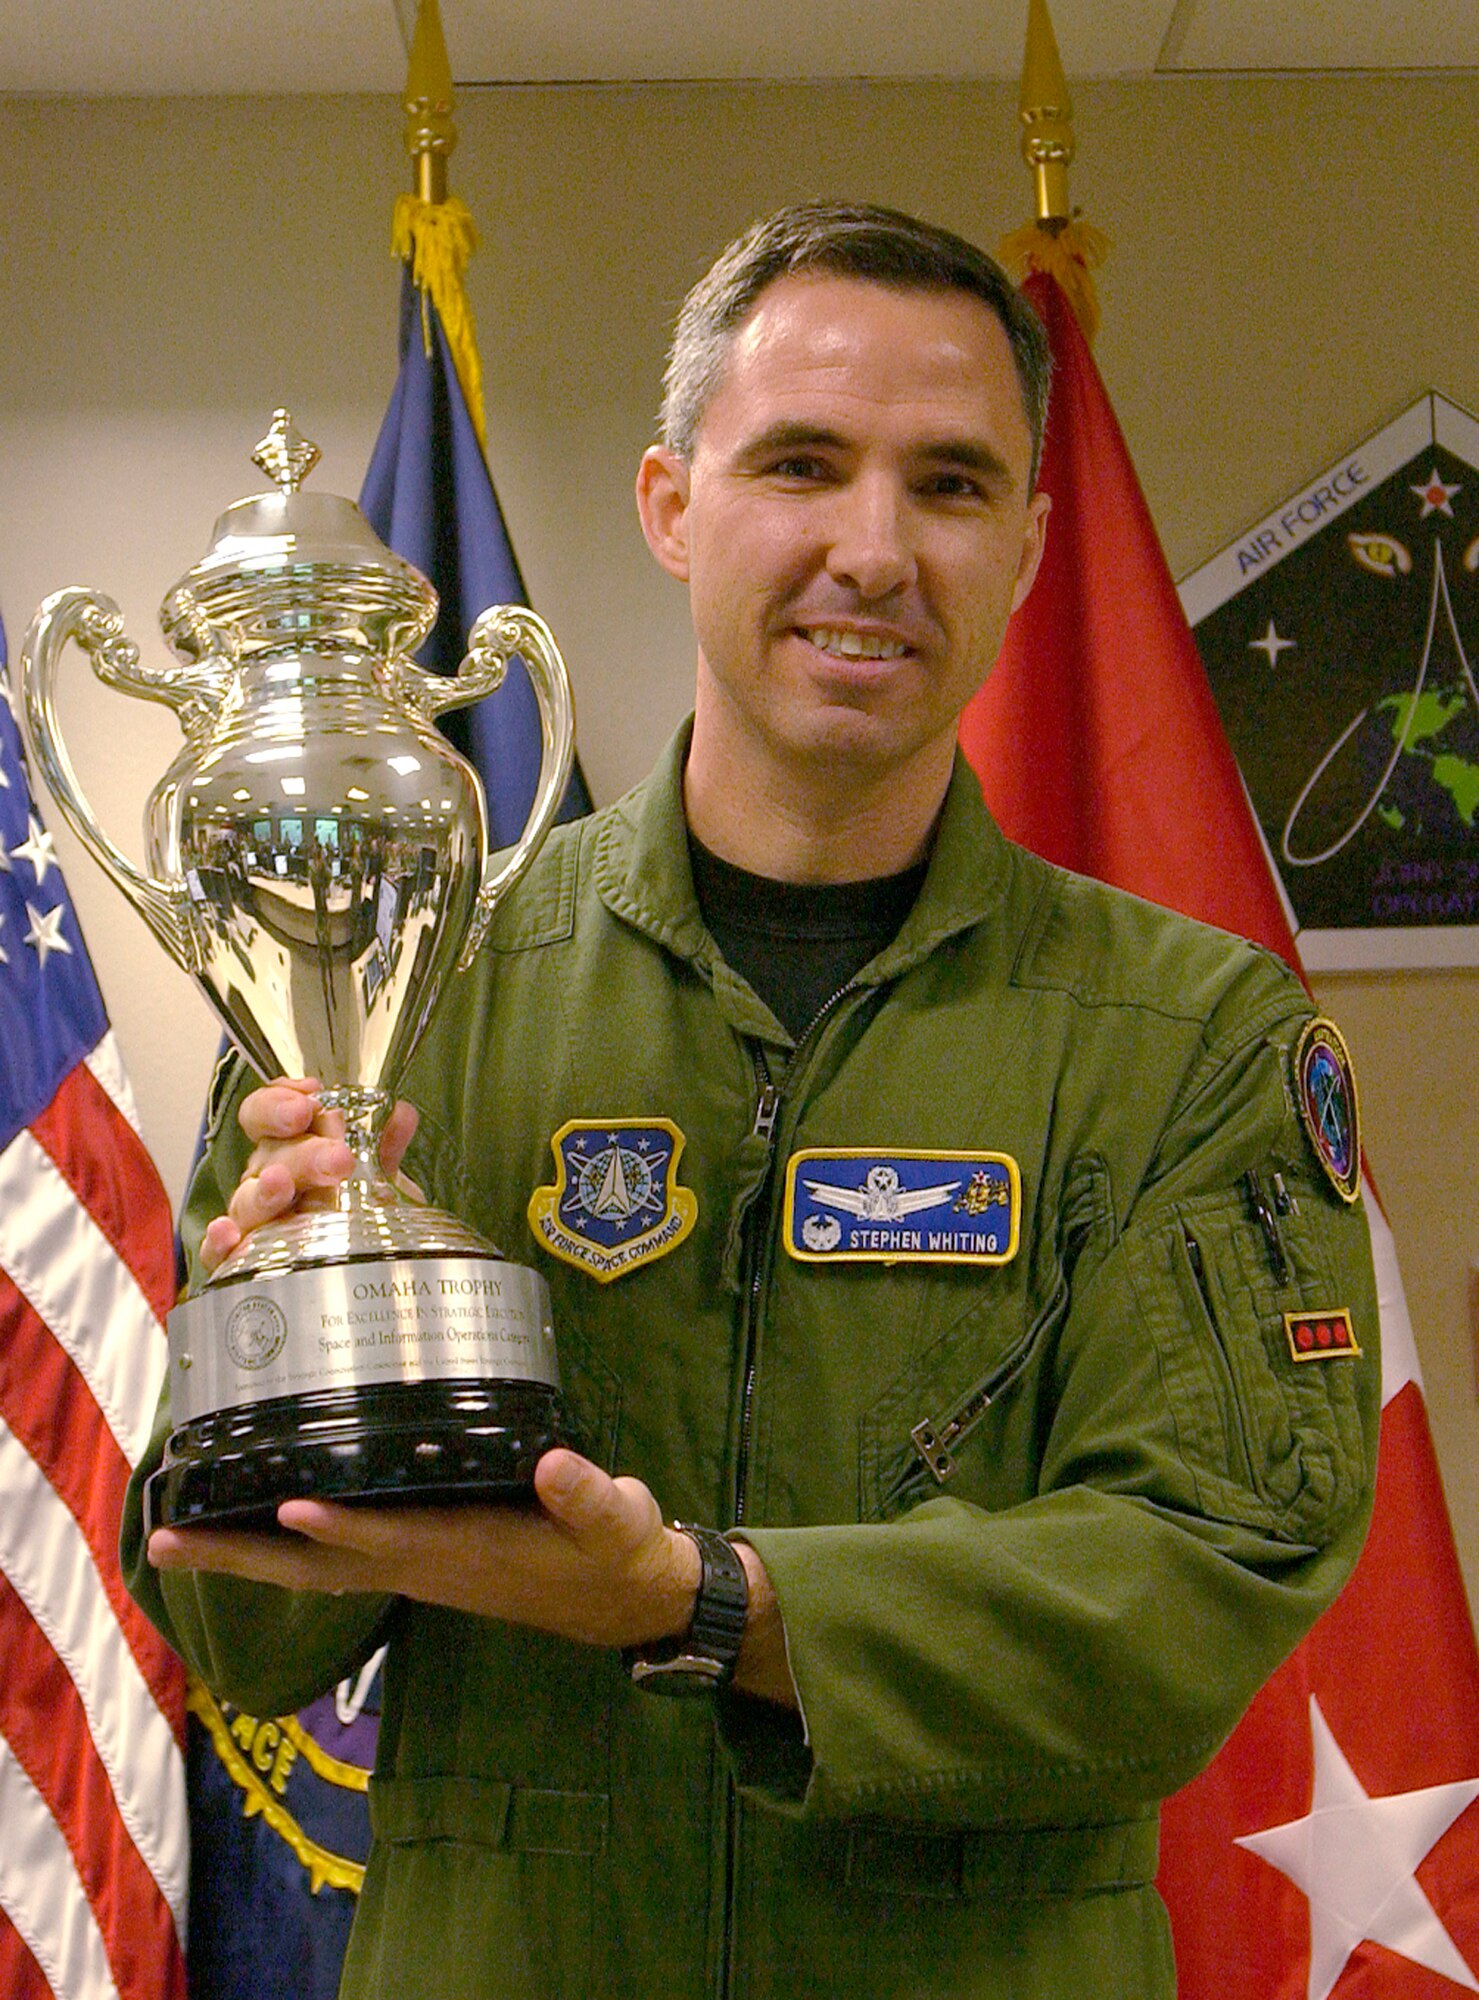 Col. Stephen Whiting, 614th Space Operations Group commander, displays the Omaha Trophy he and his team received for their outstanding performance. The award is presented annually to assigned units that demonstrate the highest standards of performance.  Selection for the award is based on formal evaluations, meritorious achievement, safety and other factors such as community involvement and humanitarian efforts. (U.S. Air Force photo by Airman Stephanie Longoria)